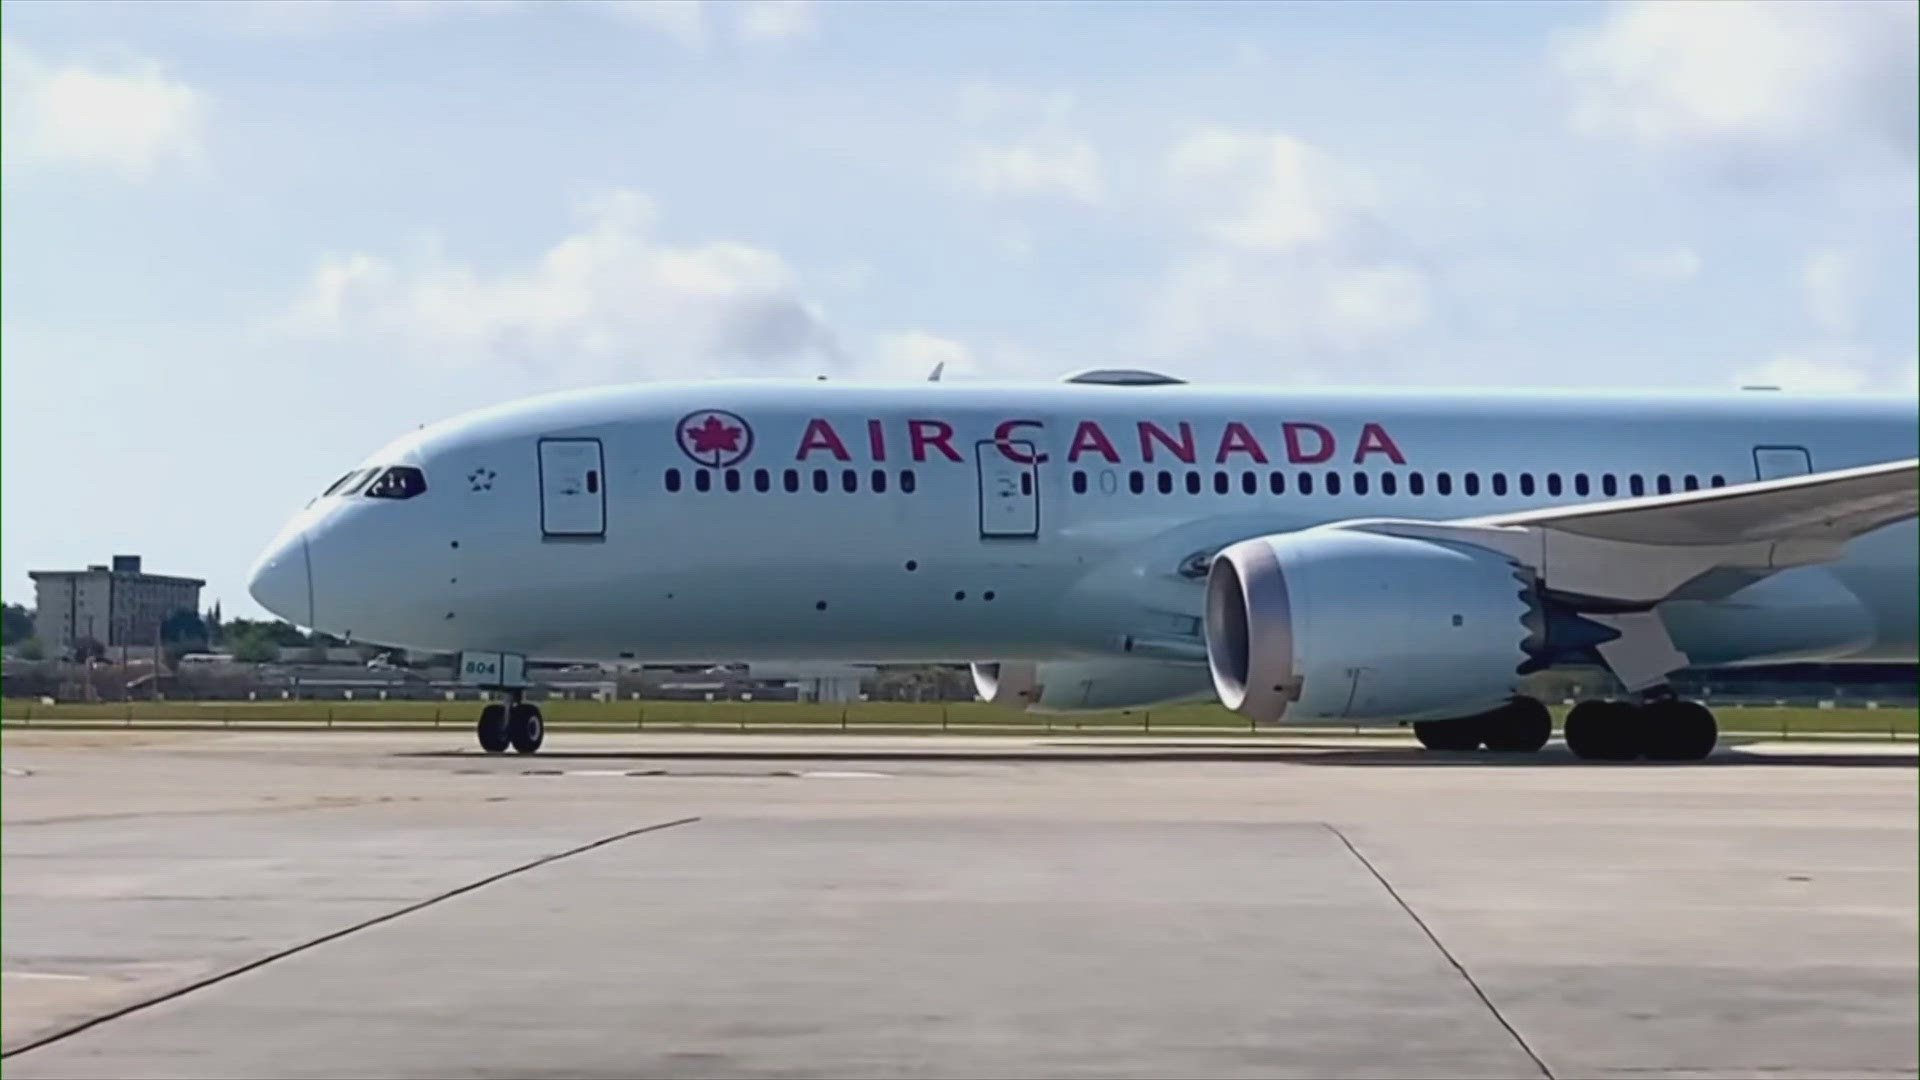 Air Canada says it is suspending the nonstop service for 'commercial reasons,' but plans to restart CLE to Toronto flights at the beginning of May 2025.